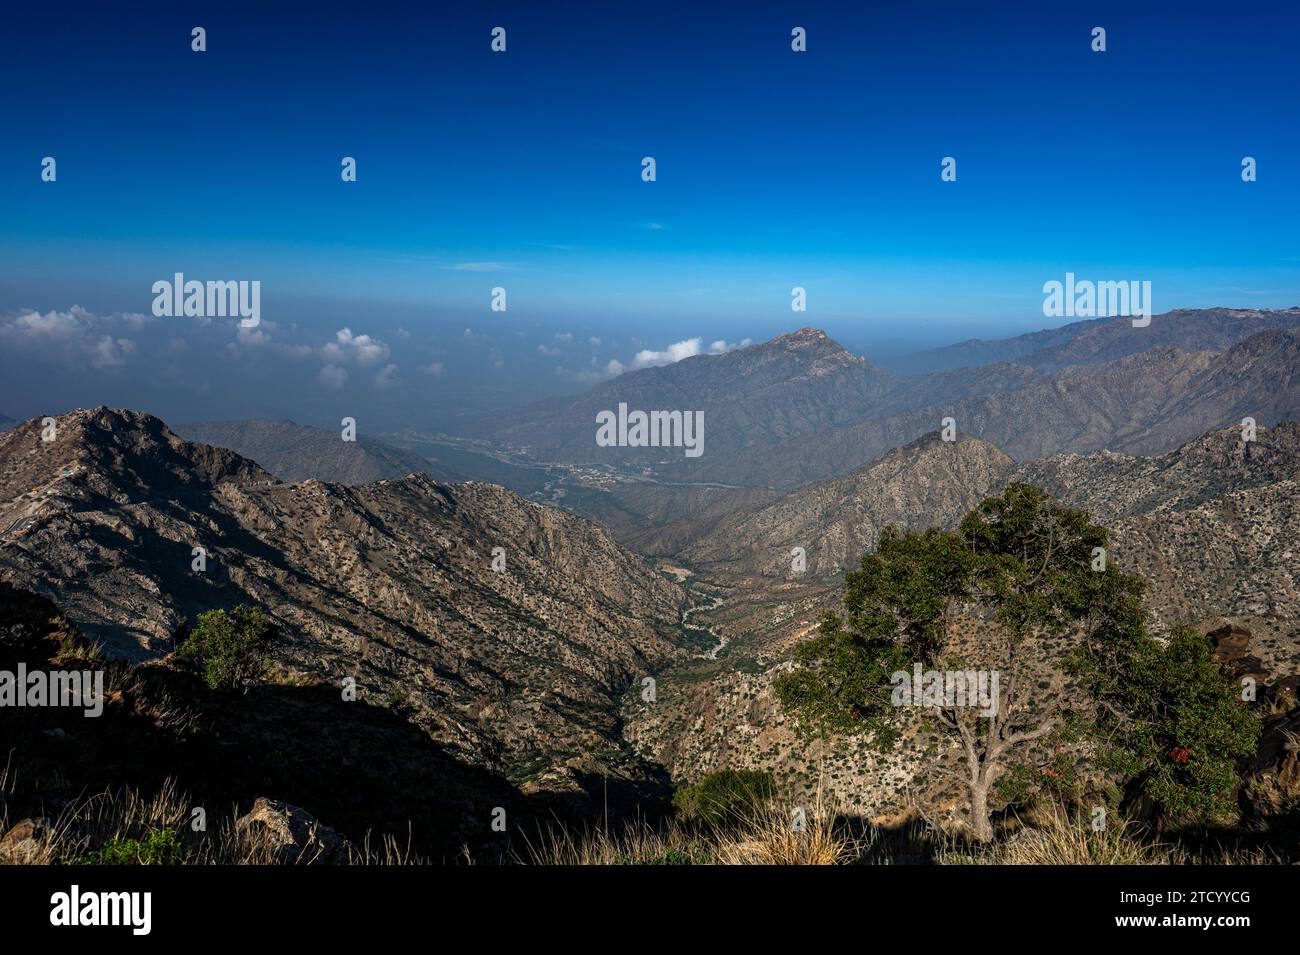 Dramatic and picturesque mountain landscape. Early morning in the Sarawat Mountains, Saudi Arabia. Stock Photo